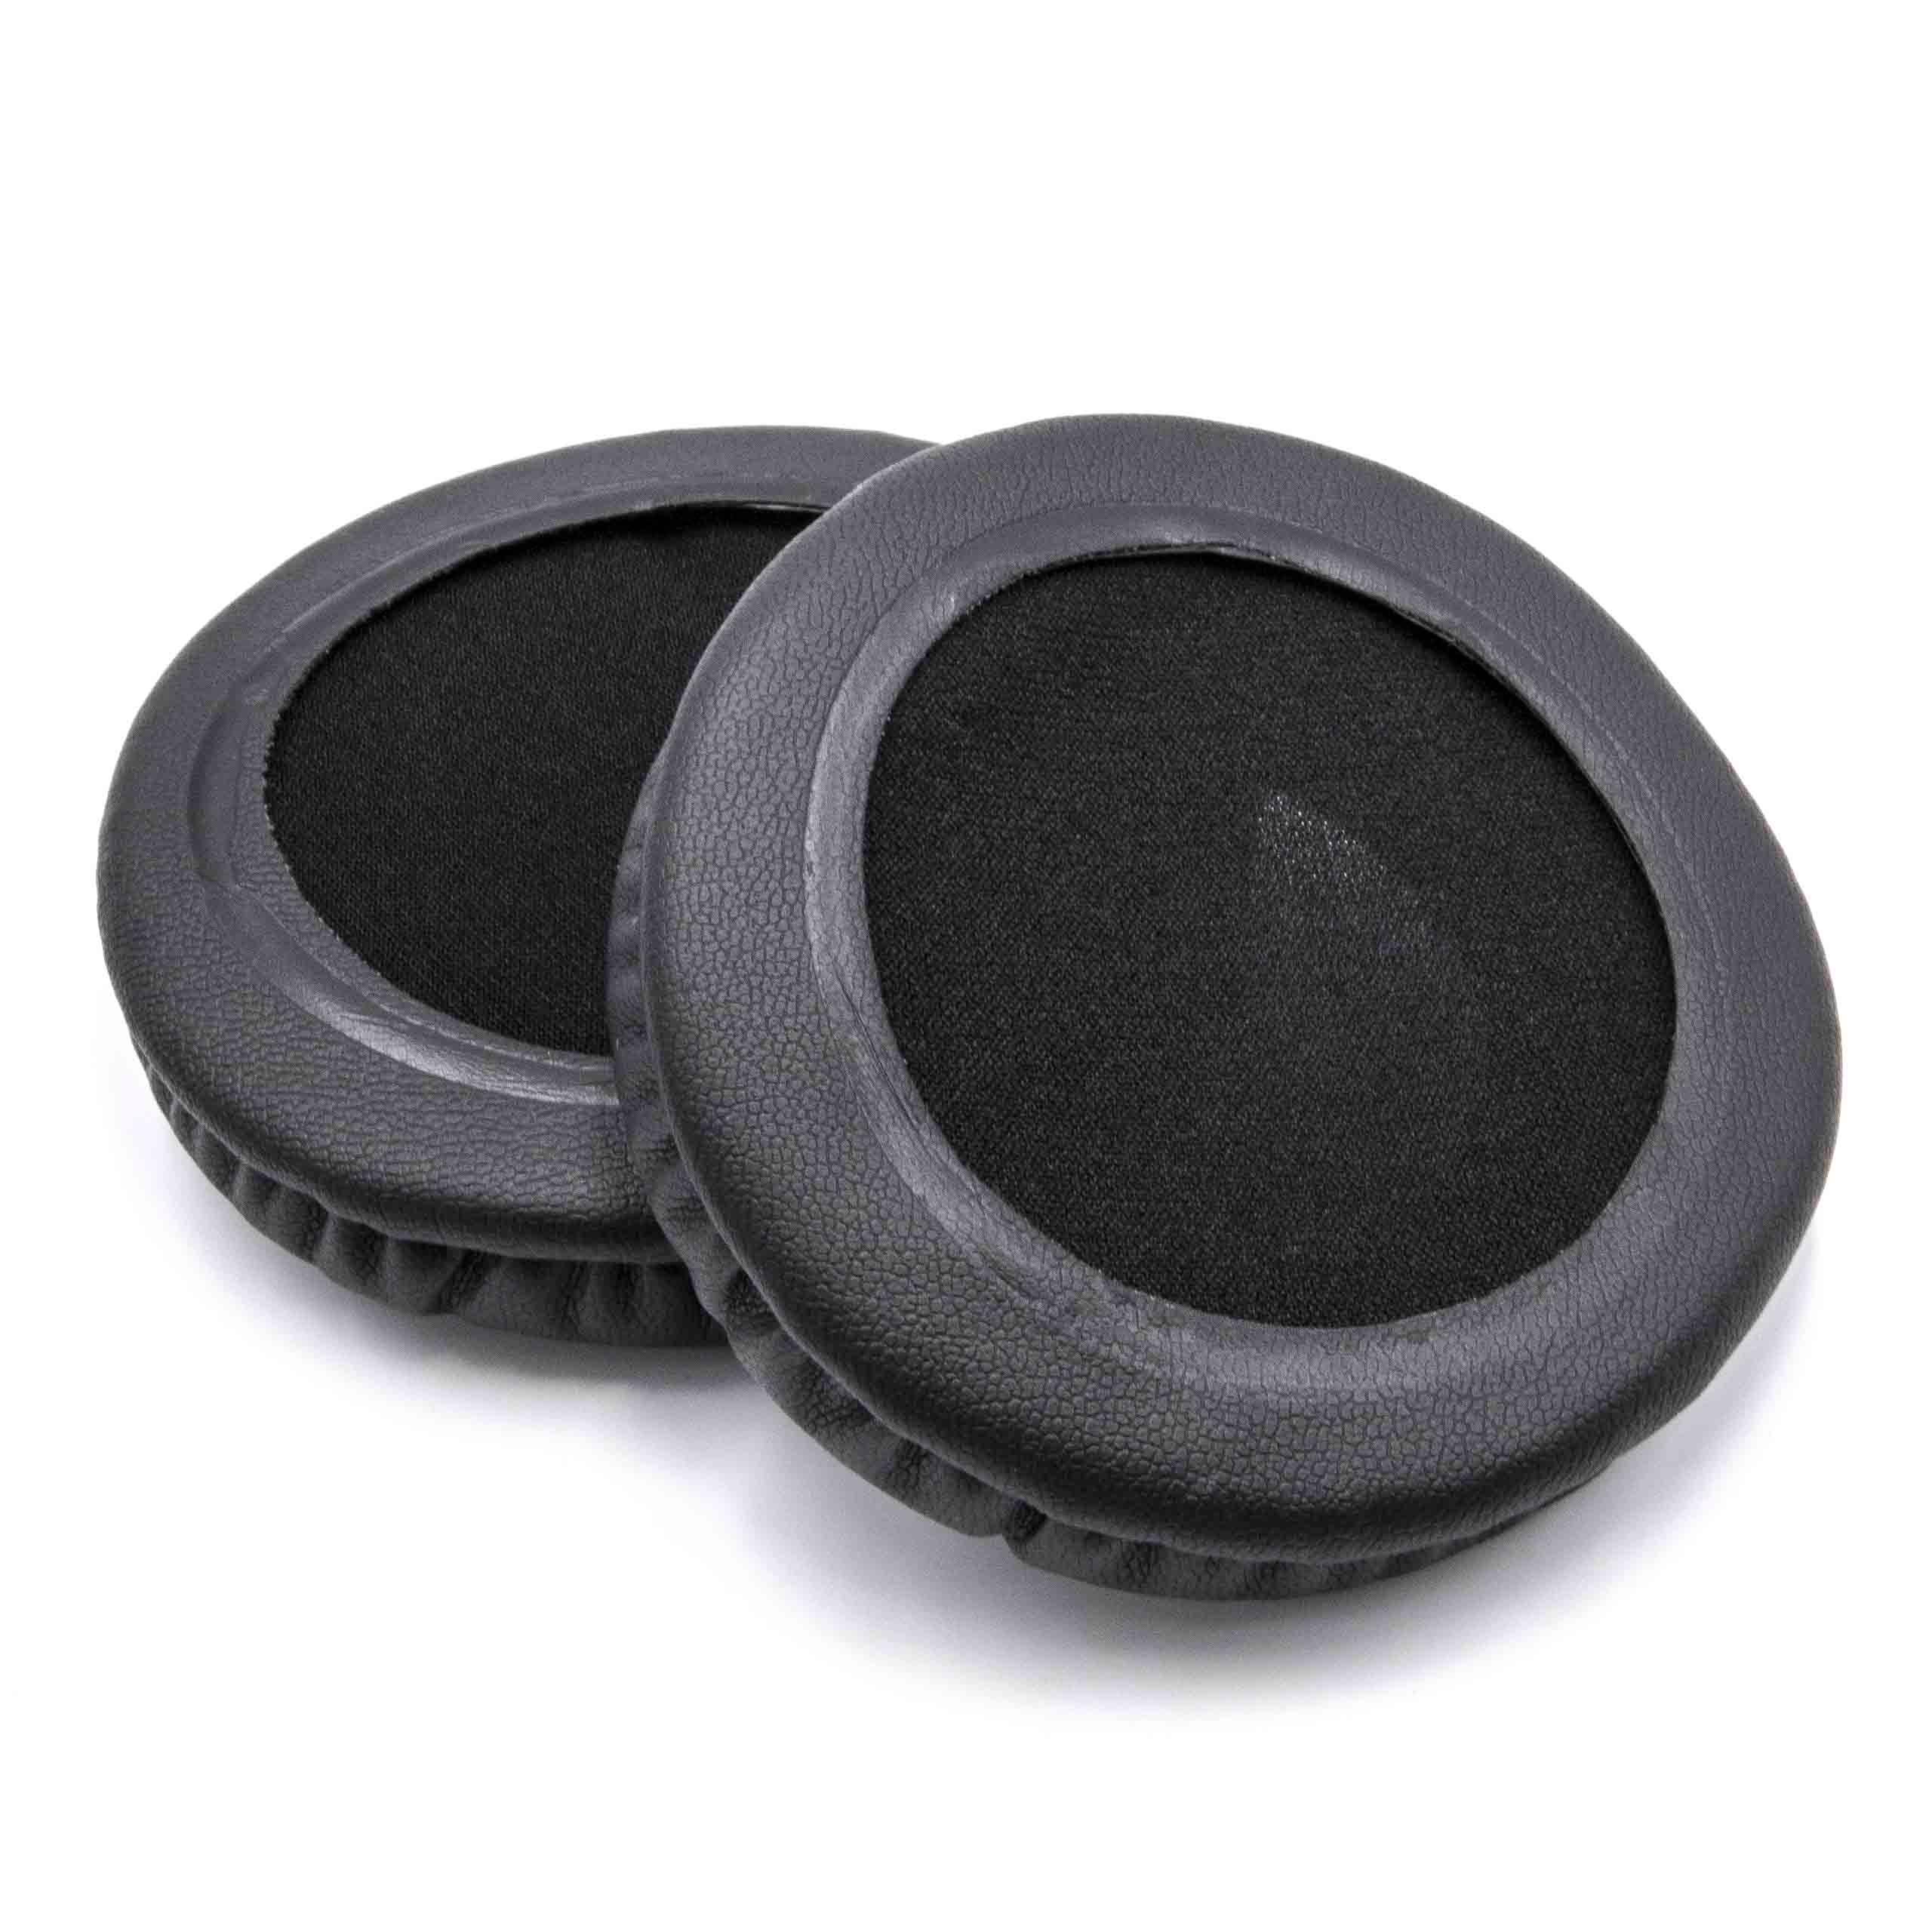 2x Ear Pads suitable for headphones which require 80mm ear pads / Audio Technica / Sony ATH-WS70 Headphones et